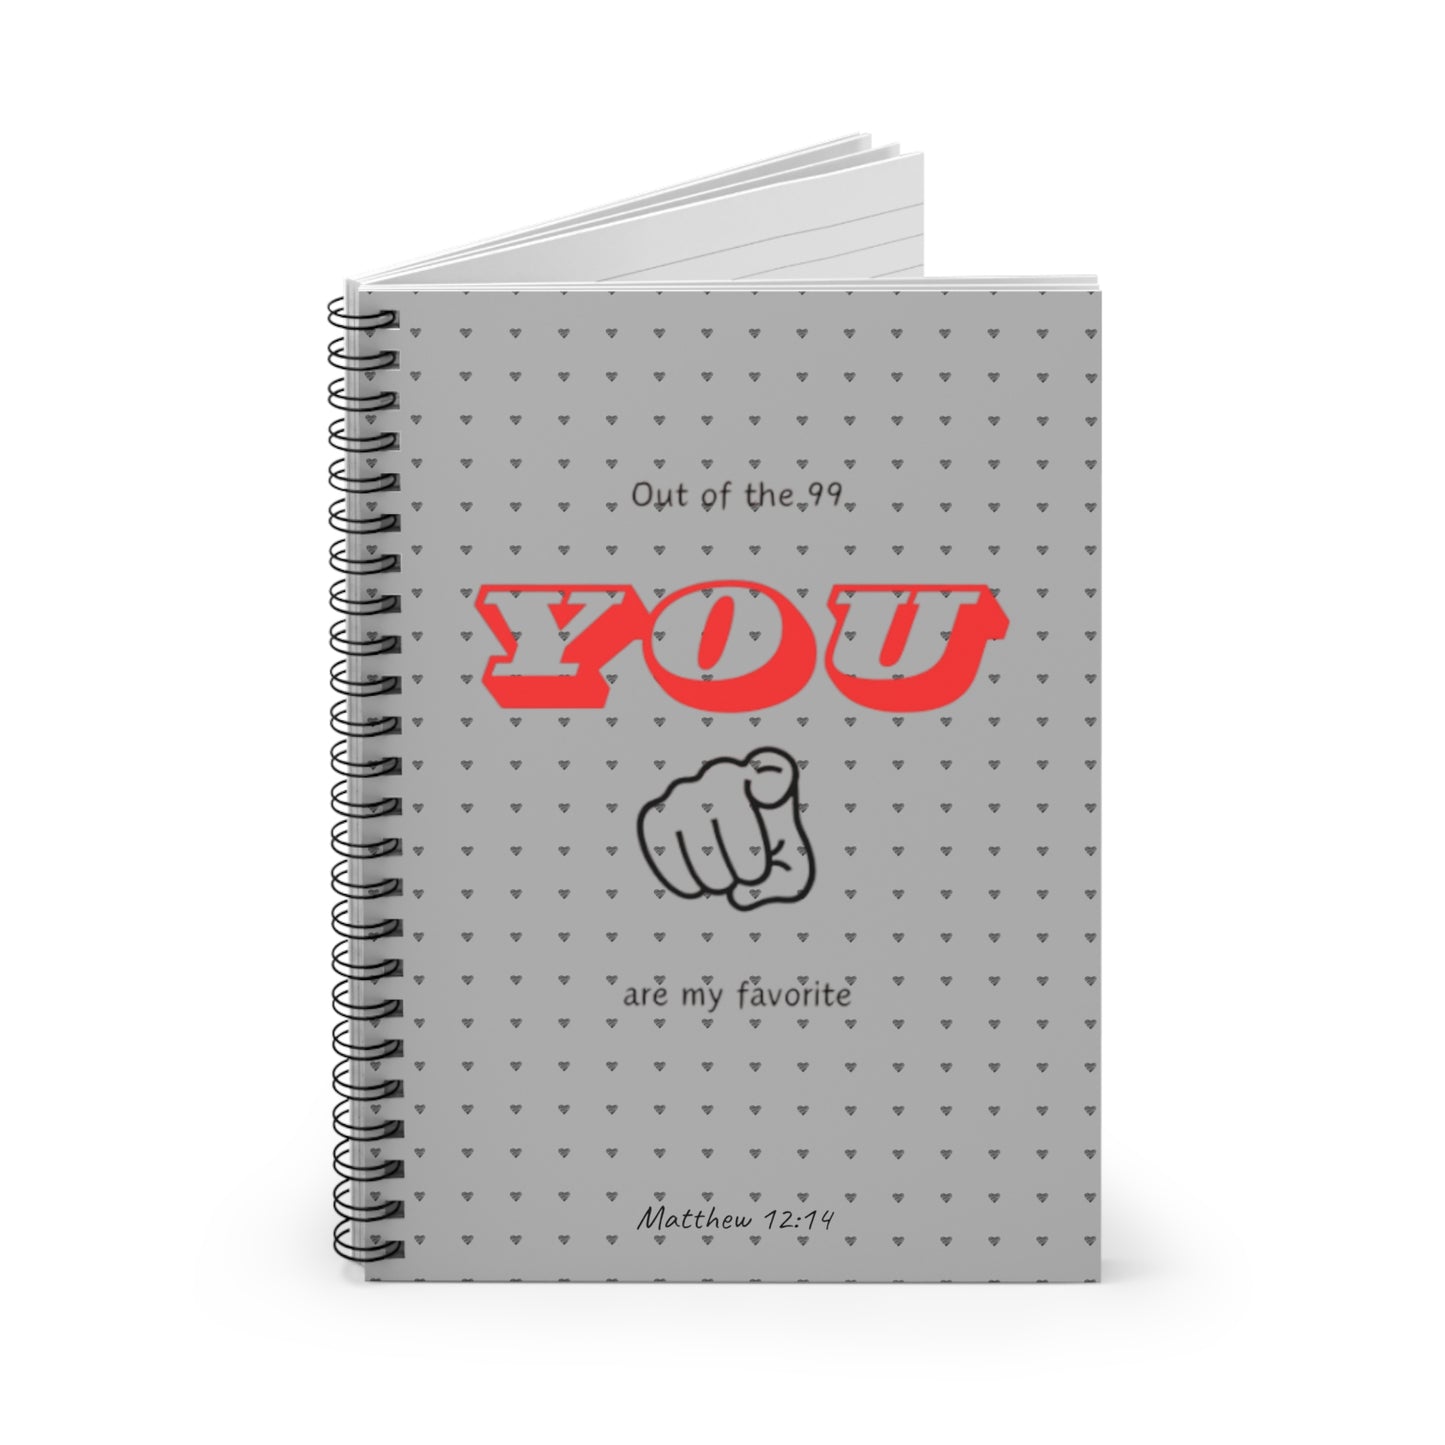 "Out of the 99, You are my Favorite" Spiral Lined Notebook